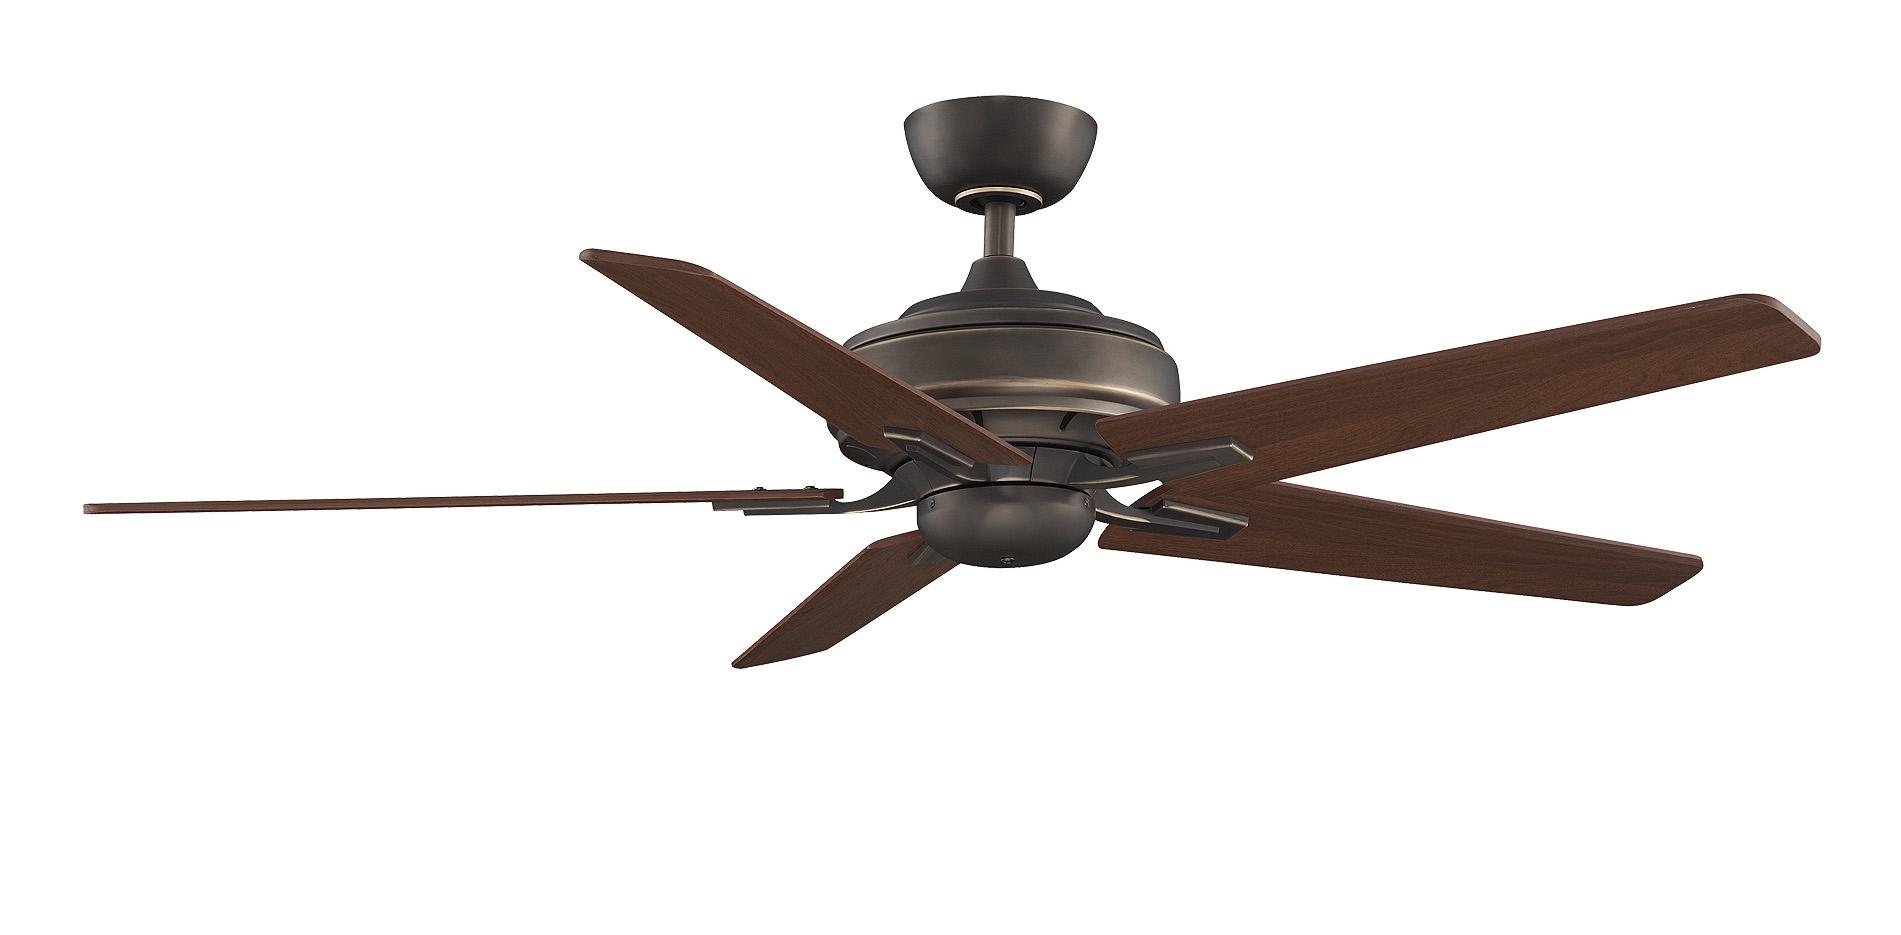 Permalink to Ceiling Fan Without Light